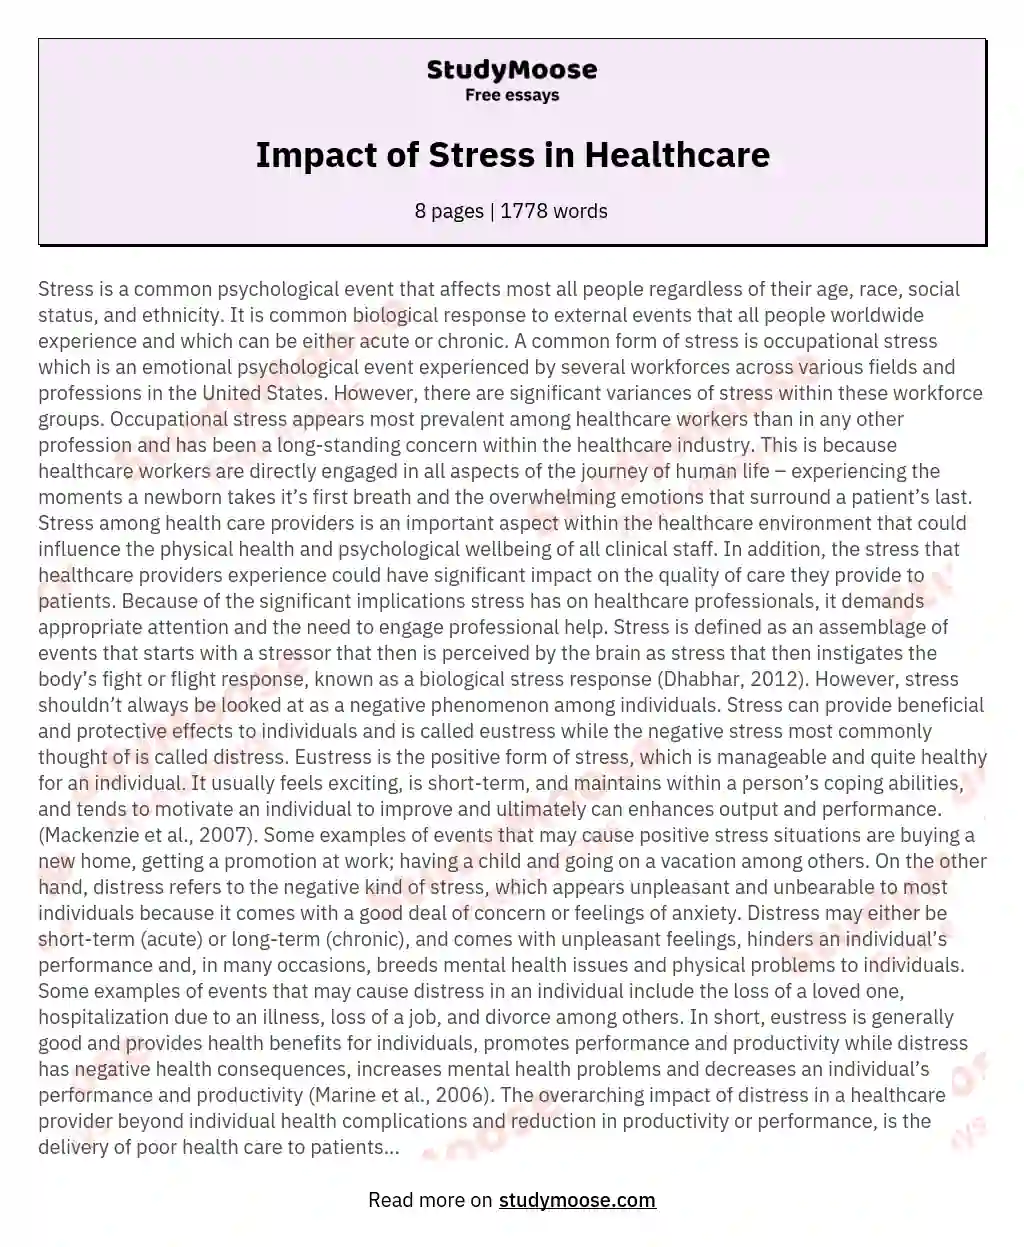 Impact of Stress in Healthcare essay